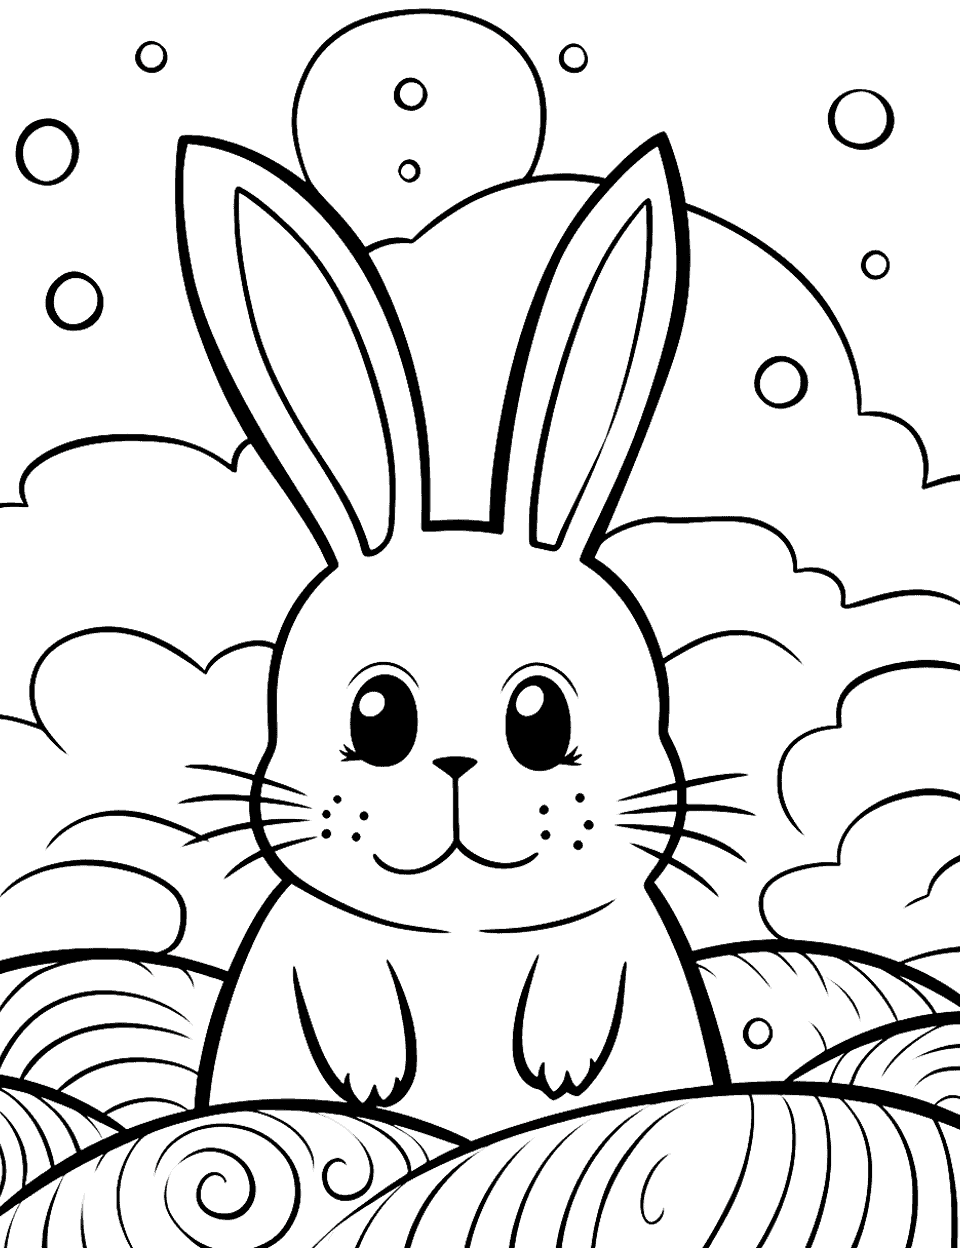 Clear Skies and Bunny Eyes Coloring Page - Centering on the bunny’s big black eyes, the page radiates out in rolling clouds and mountains.